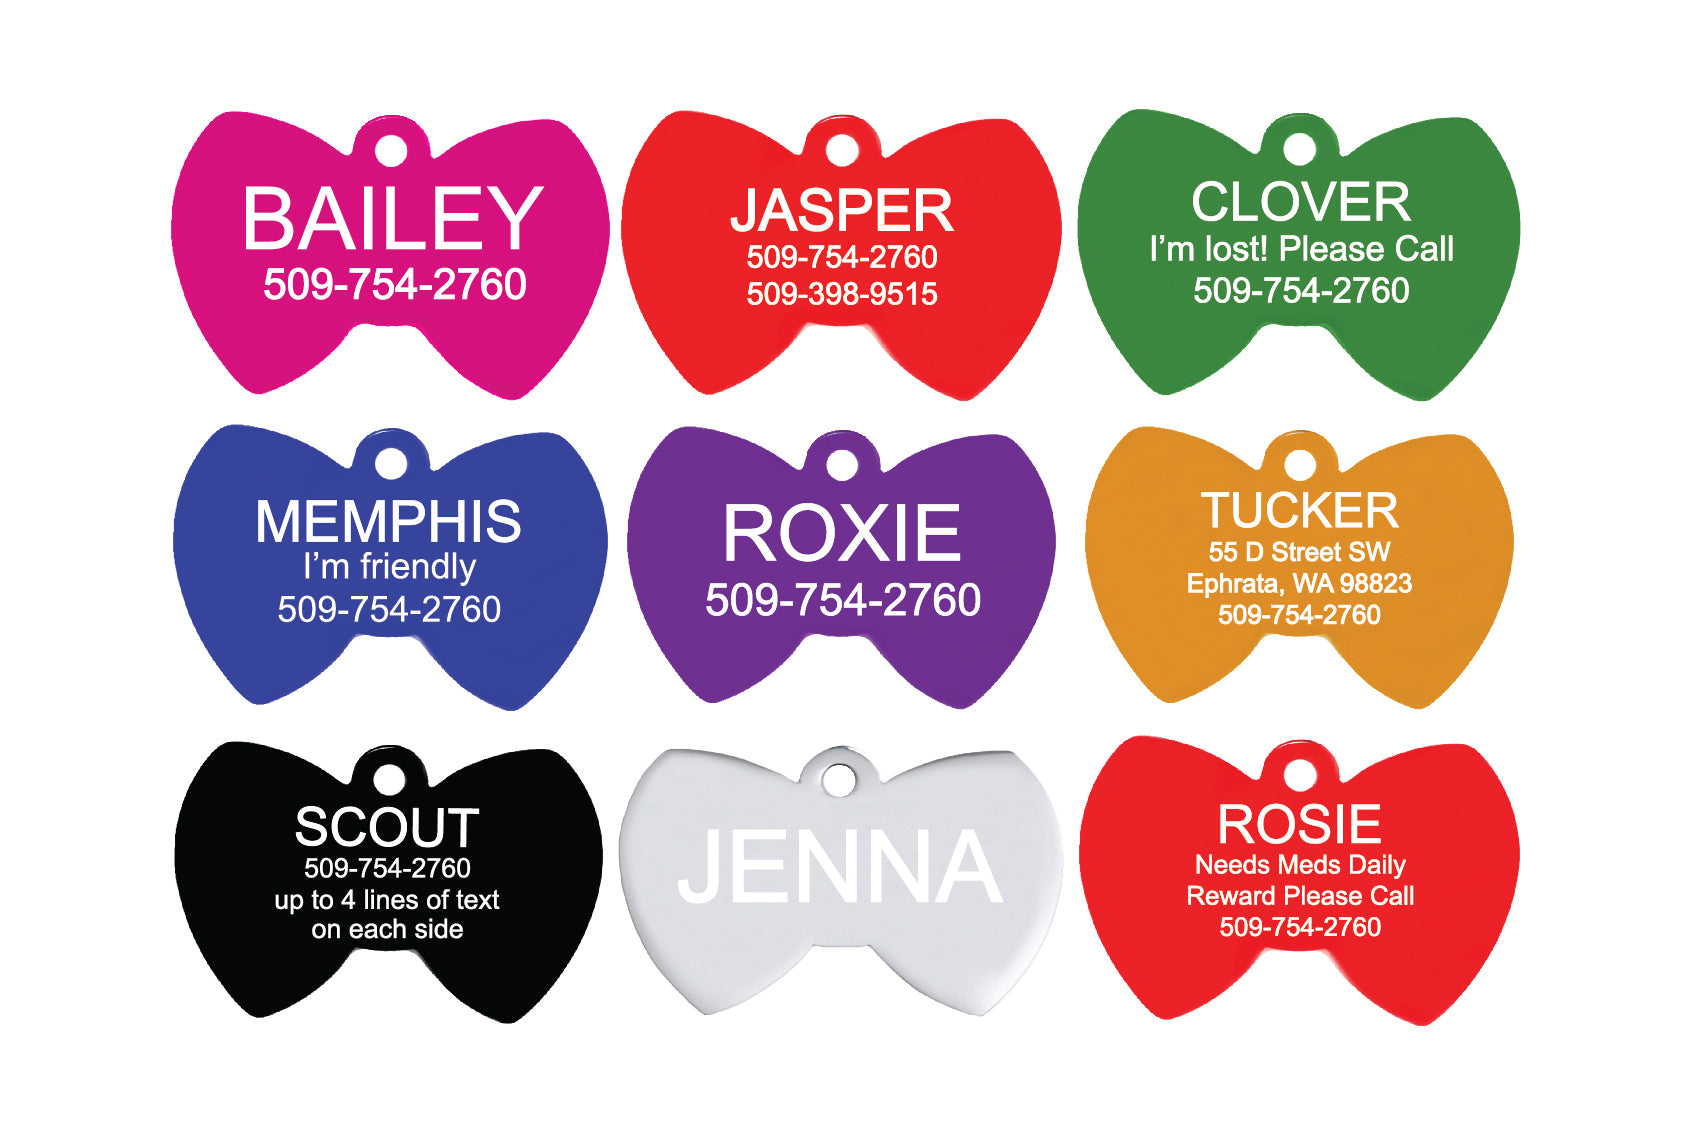 Stylish & Unique Cat Collars + Cat Bow Ties and Personalized ID Tags